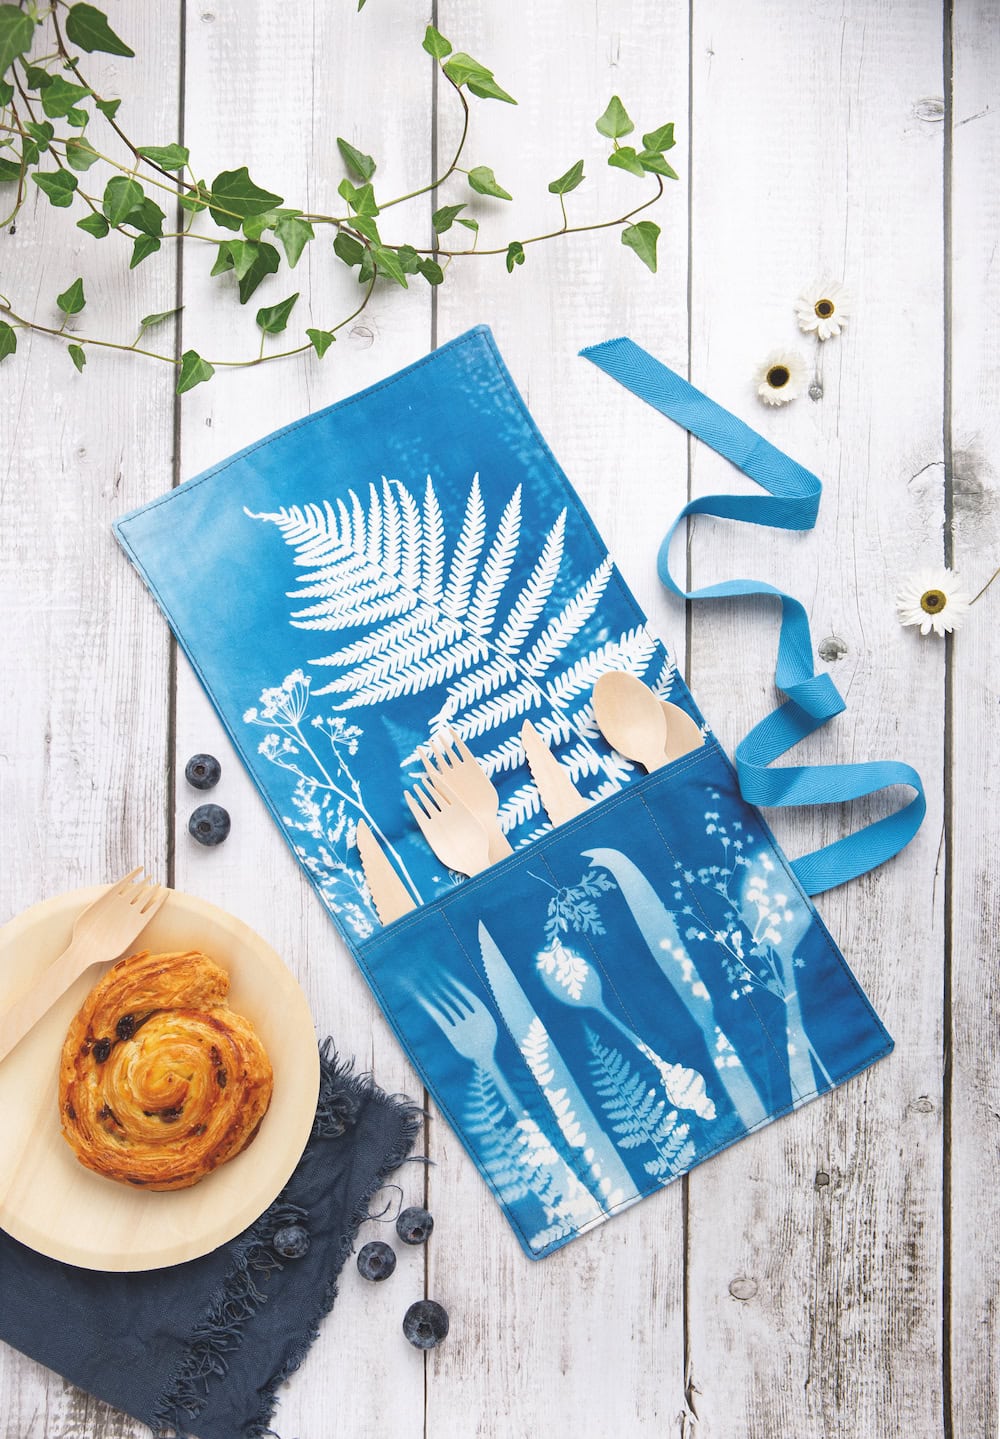 cyanotype cutlery roll with fern design by kim tillyer from her new book Beginner's Guide to Cyanotype. We have four signed copies to give away as well as a free diy tutorial by kim for you to try your hand at this highly enjoyable and creative craft